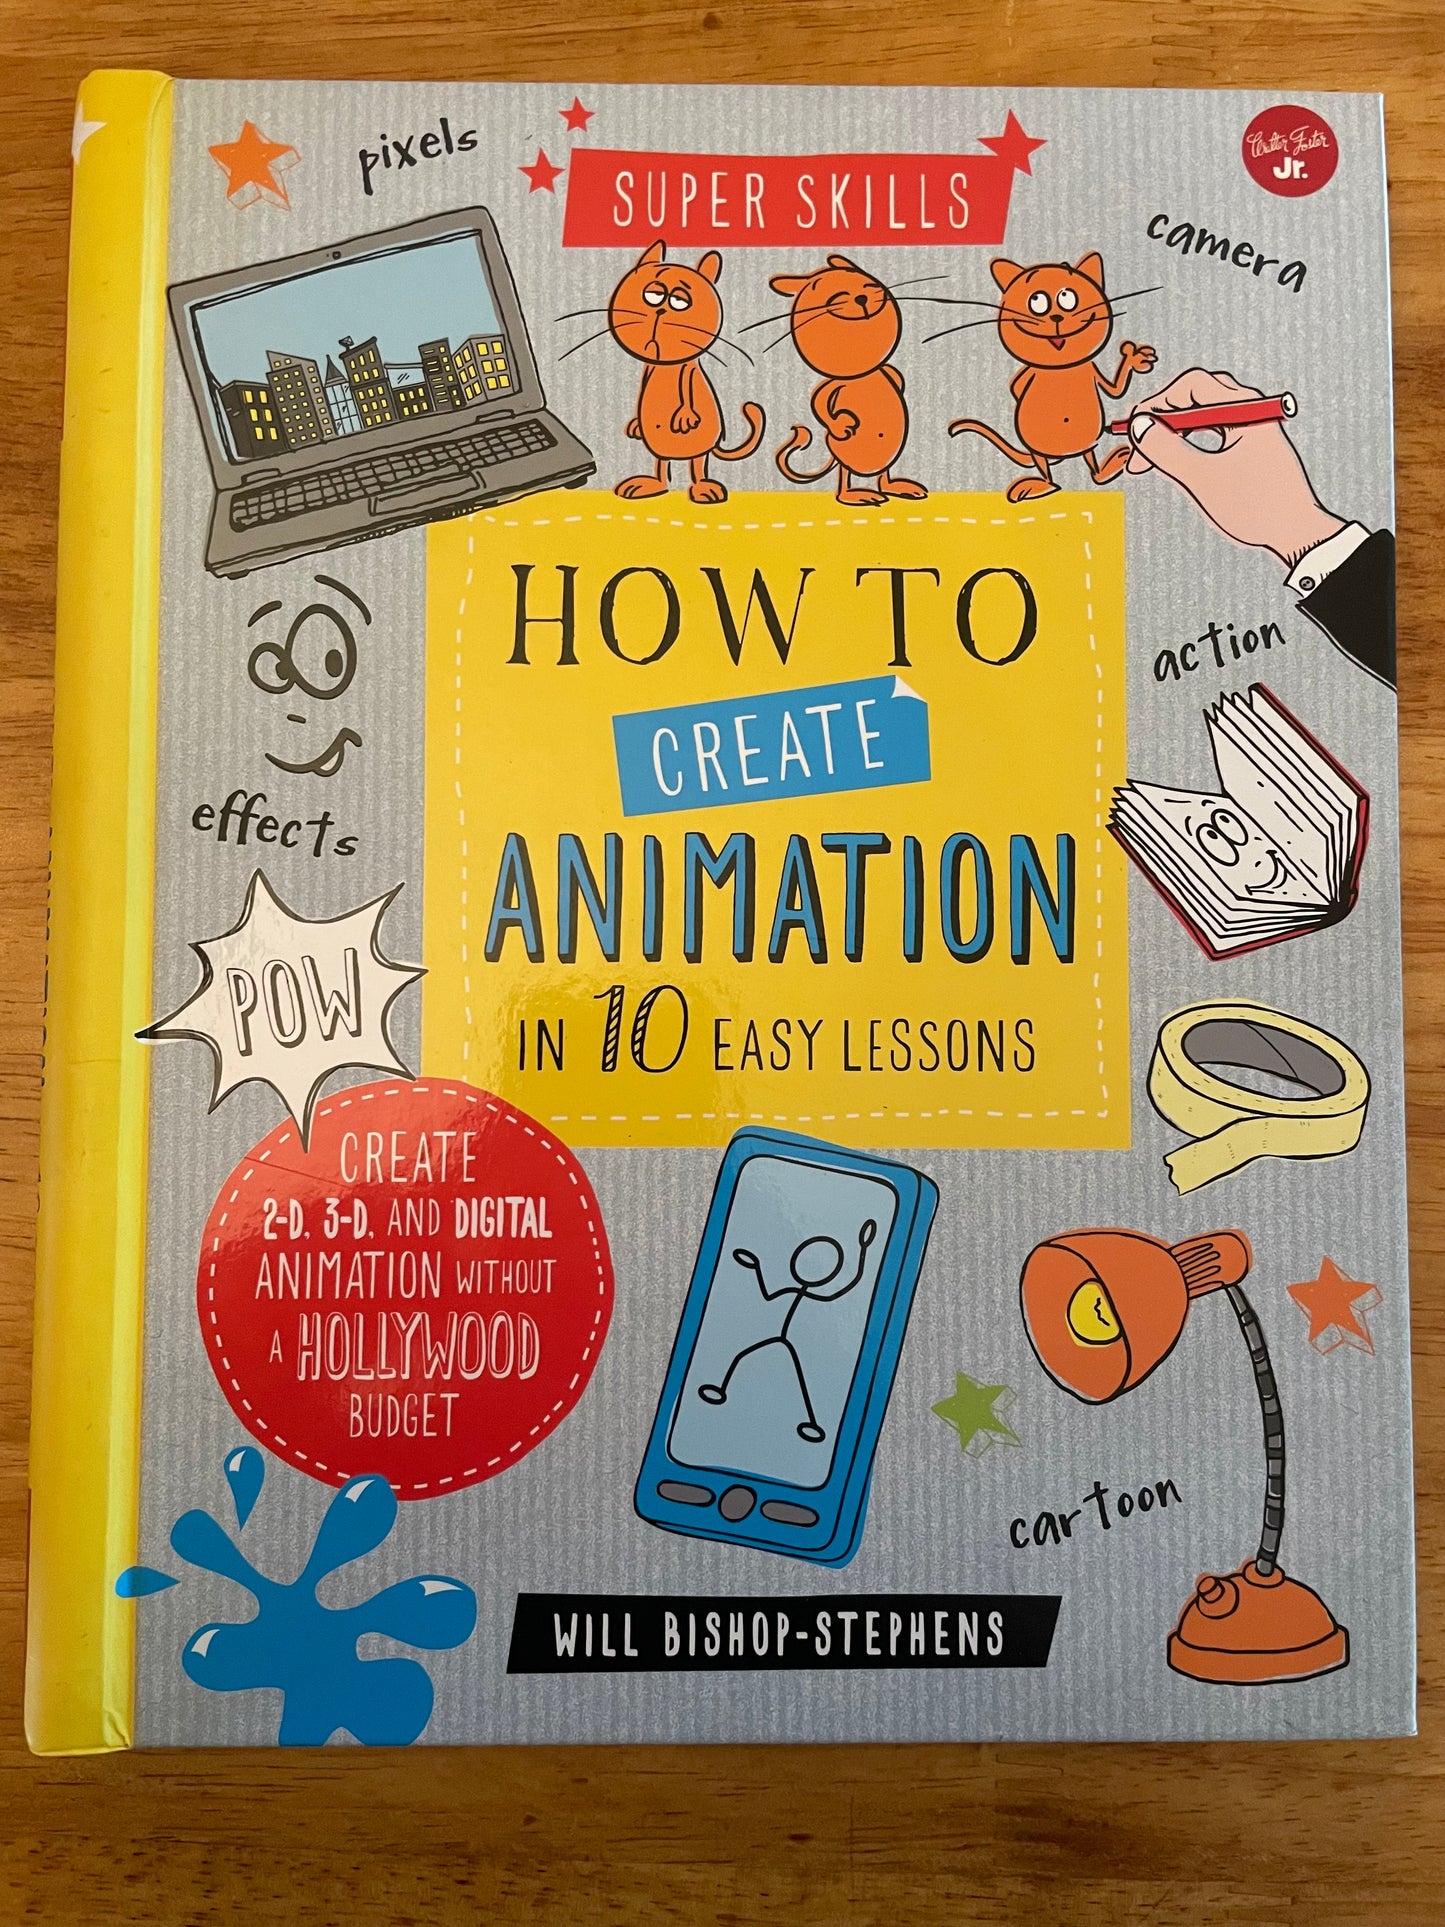 Design and Animation books